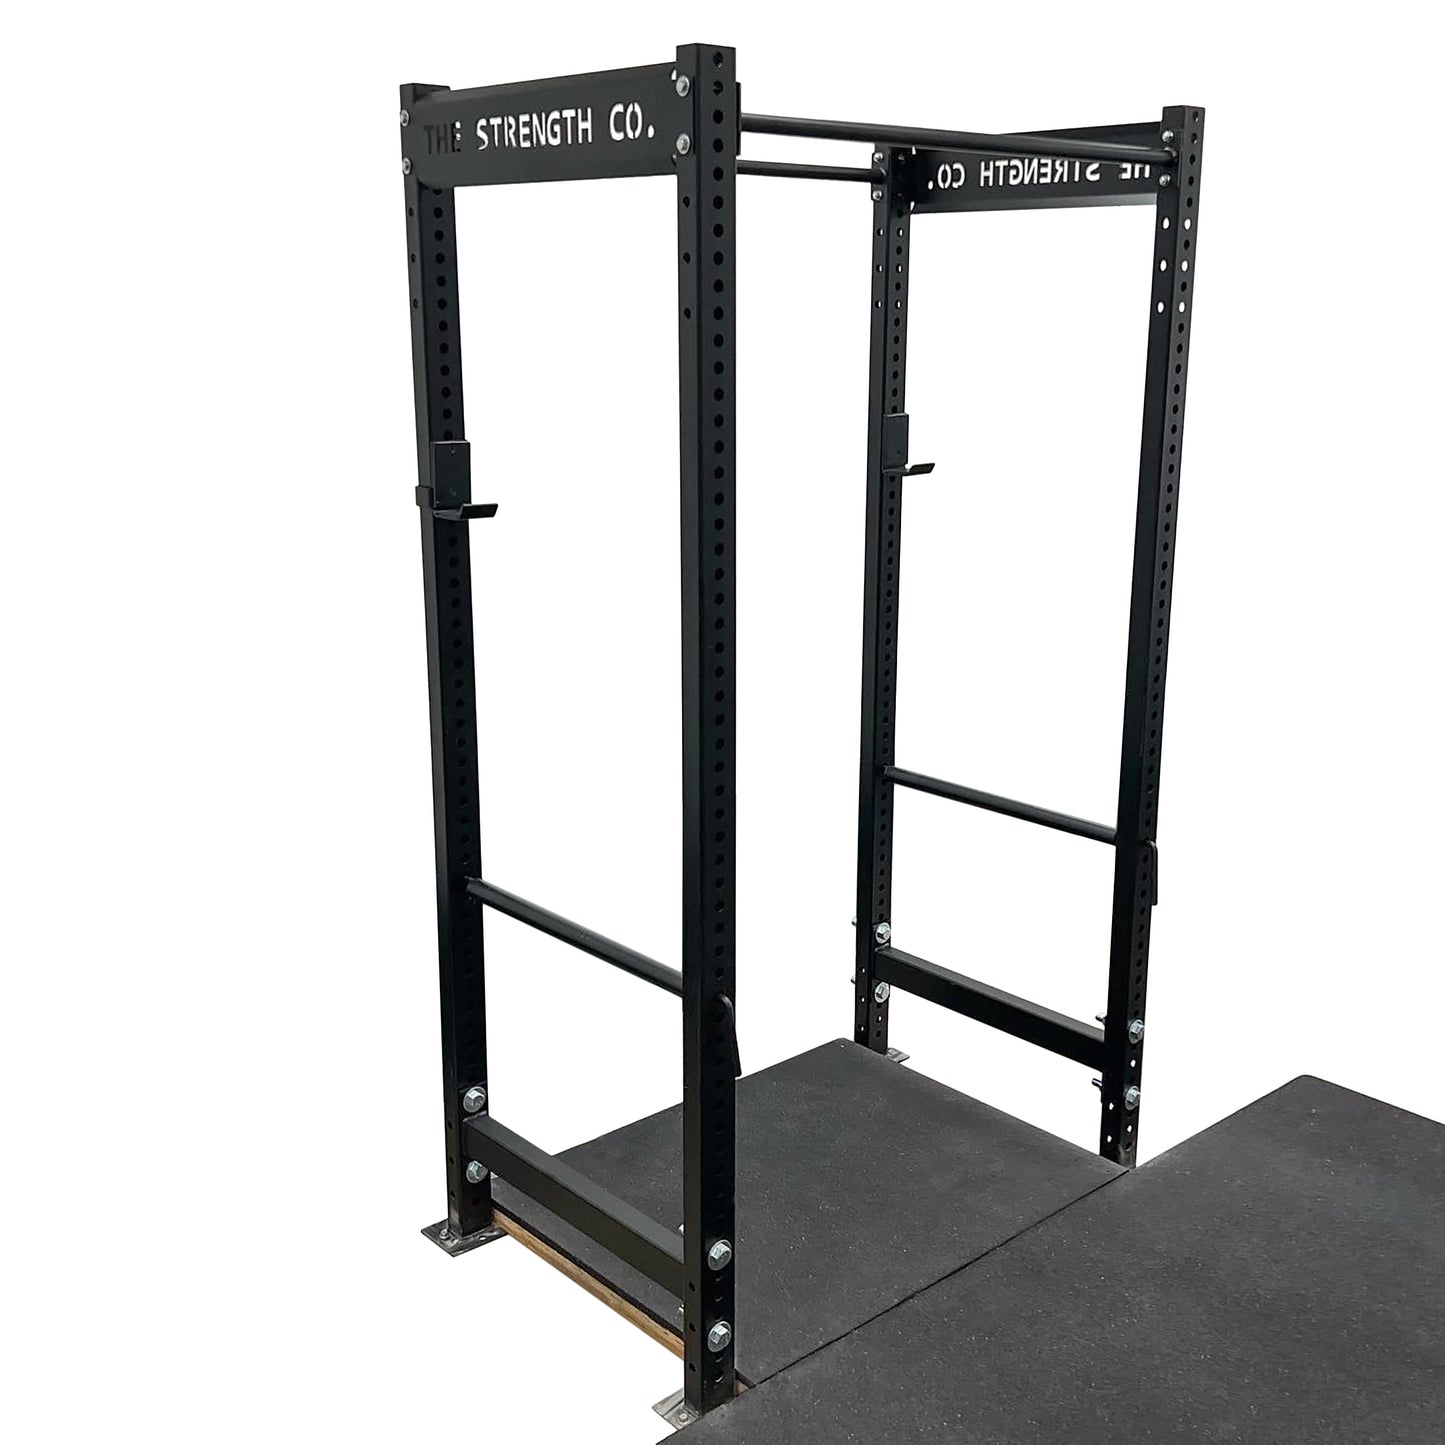 USA Power Squat Rack - "The General" – Strength Co.